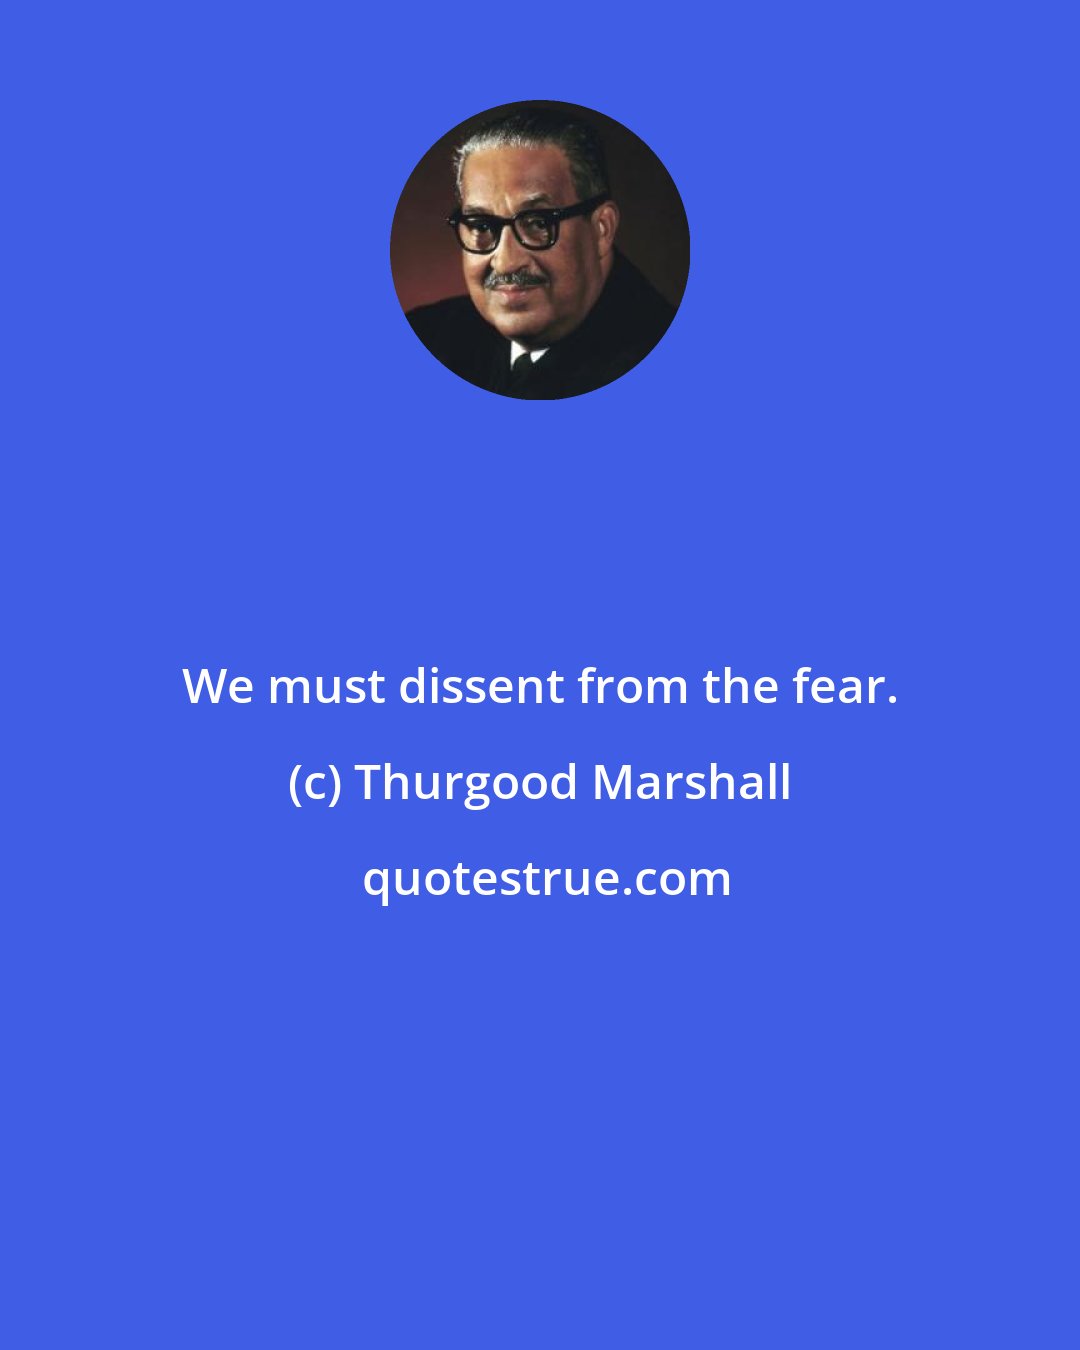 Thurgood Marshall: We must dissent from the fear.